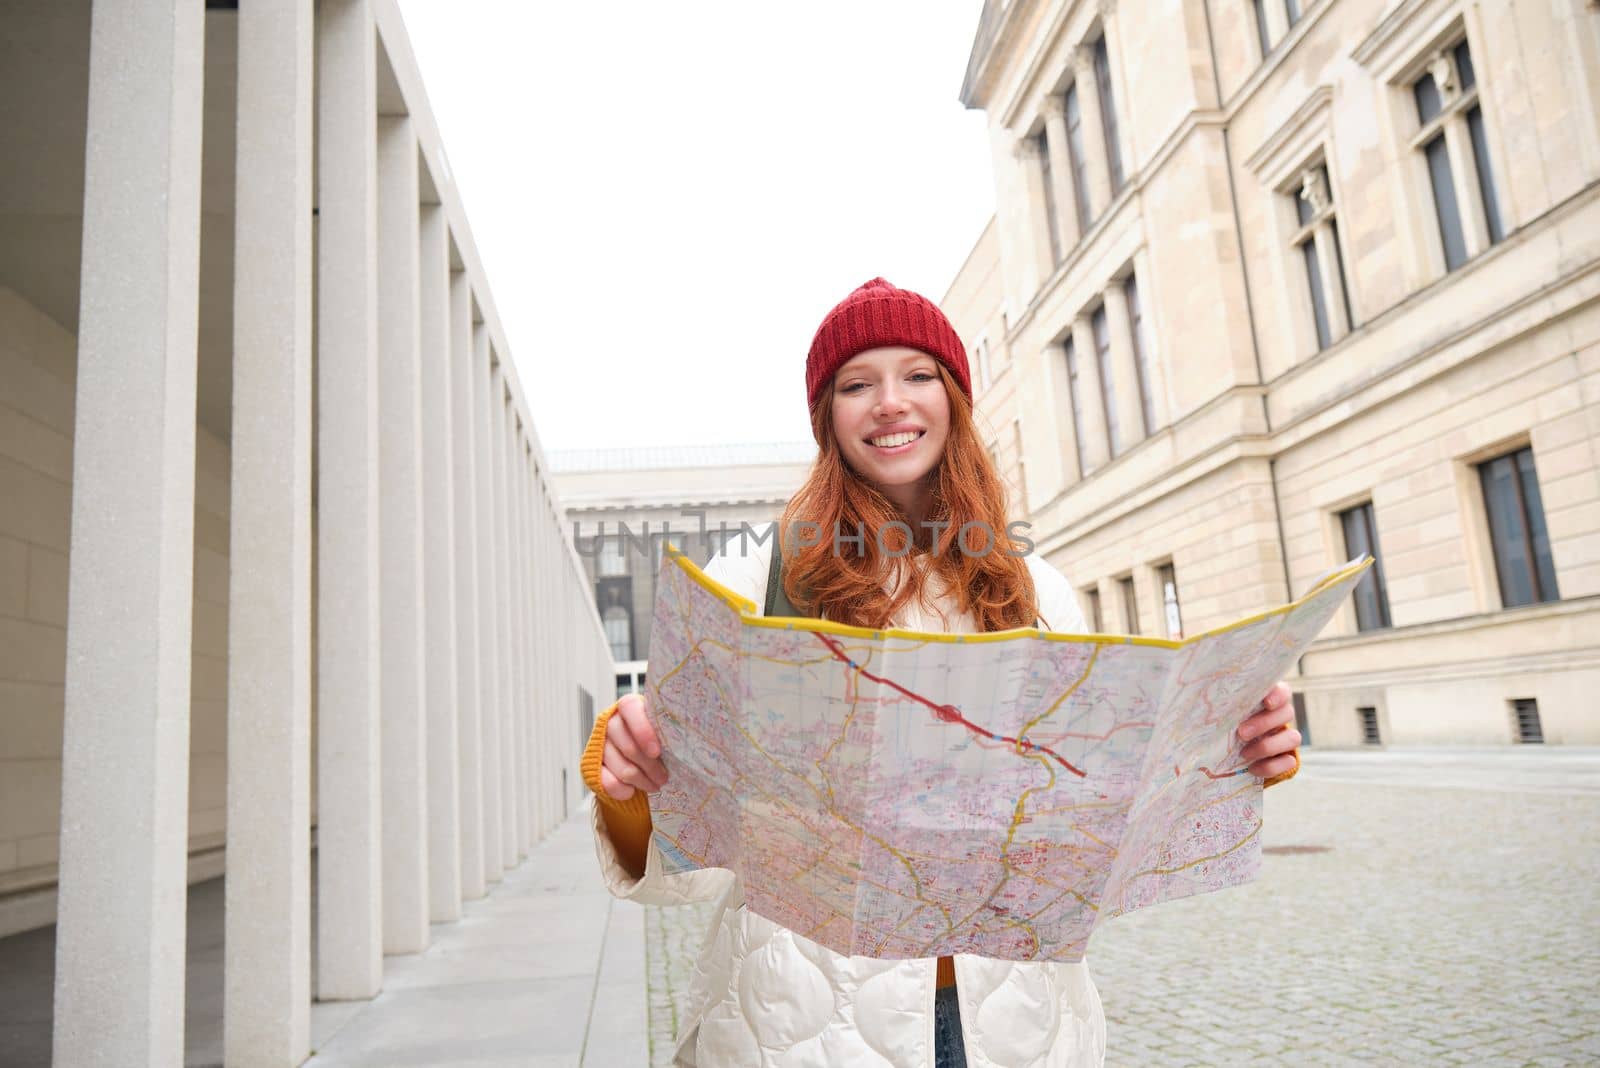 Beautiful redhead woman, tourist with city map, explores sightseeing historical landmark, walking around old town, smiling happily.